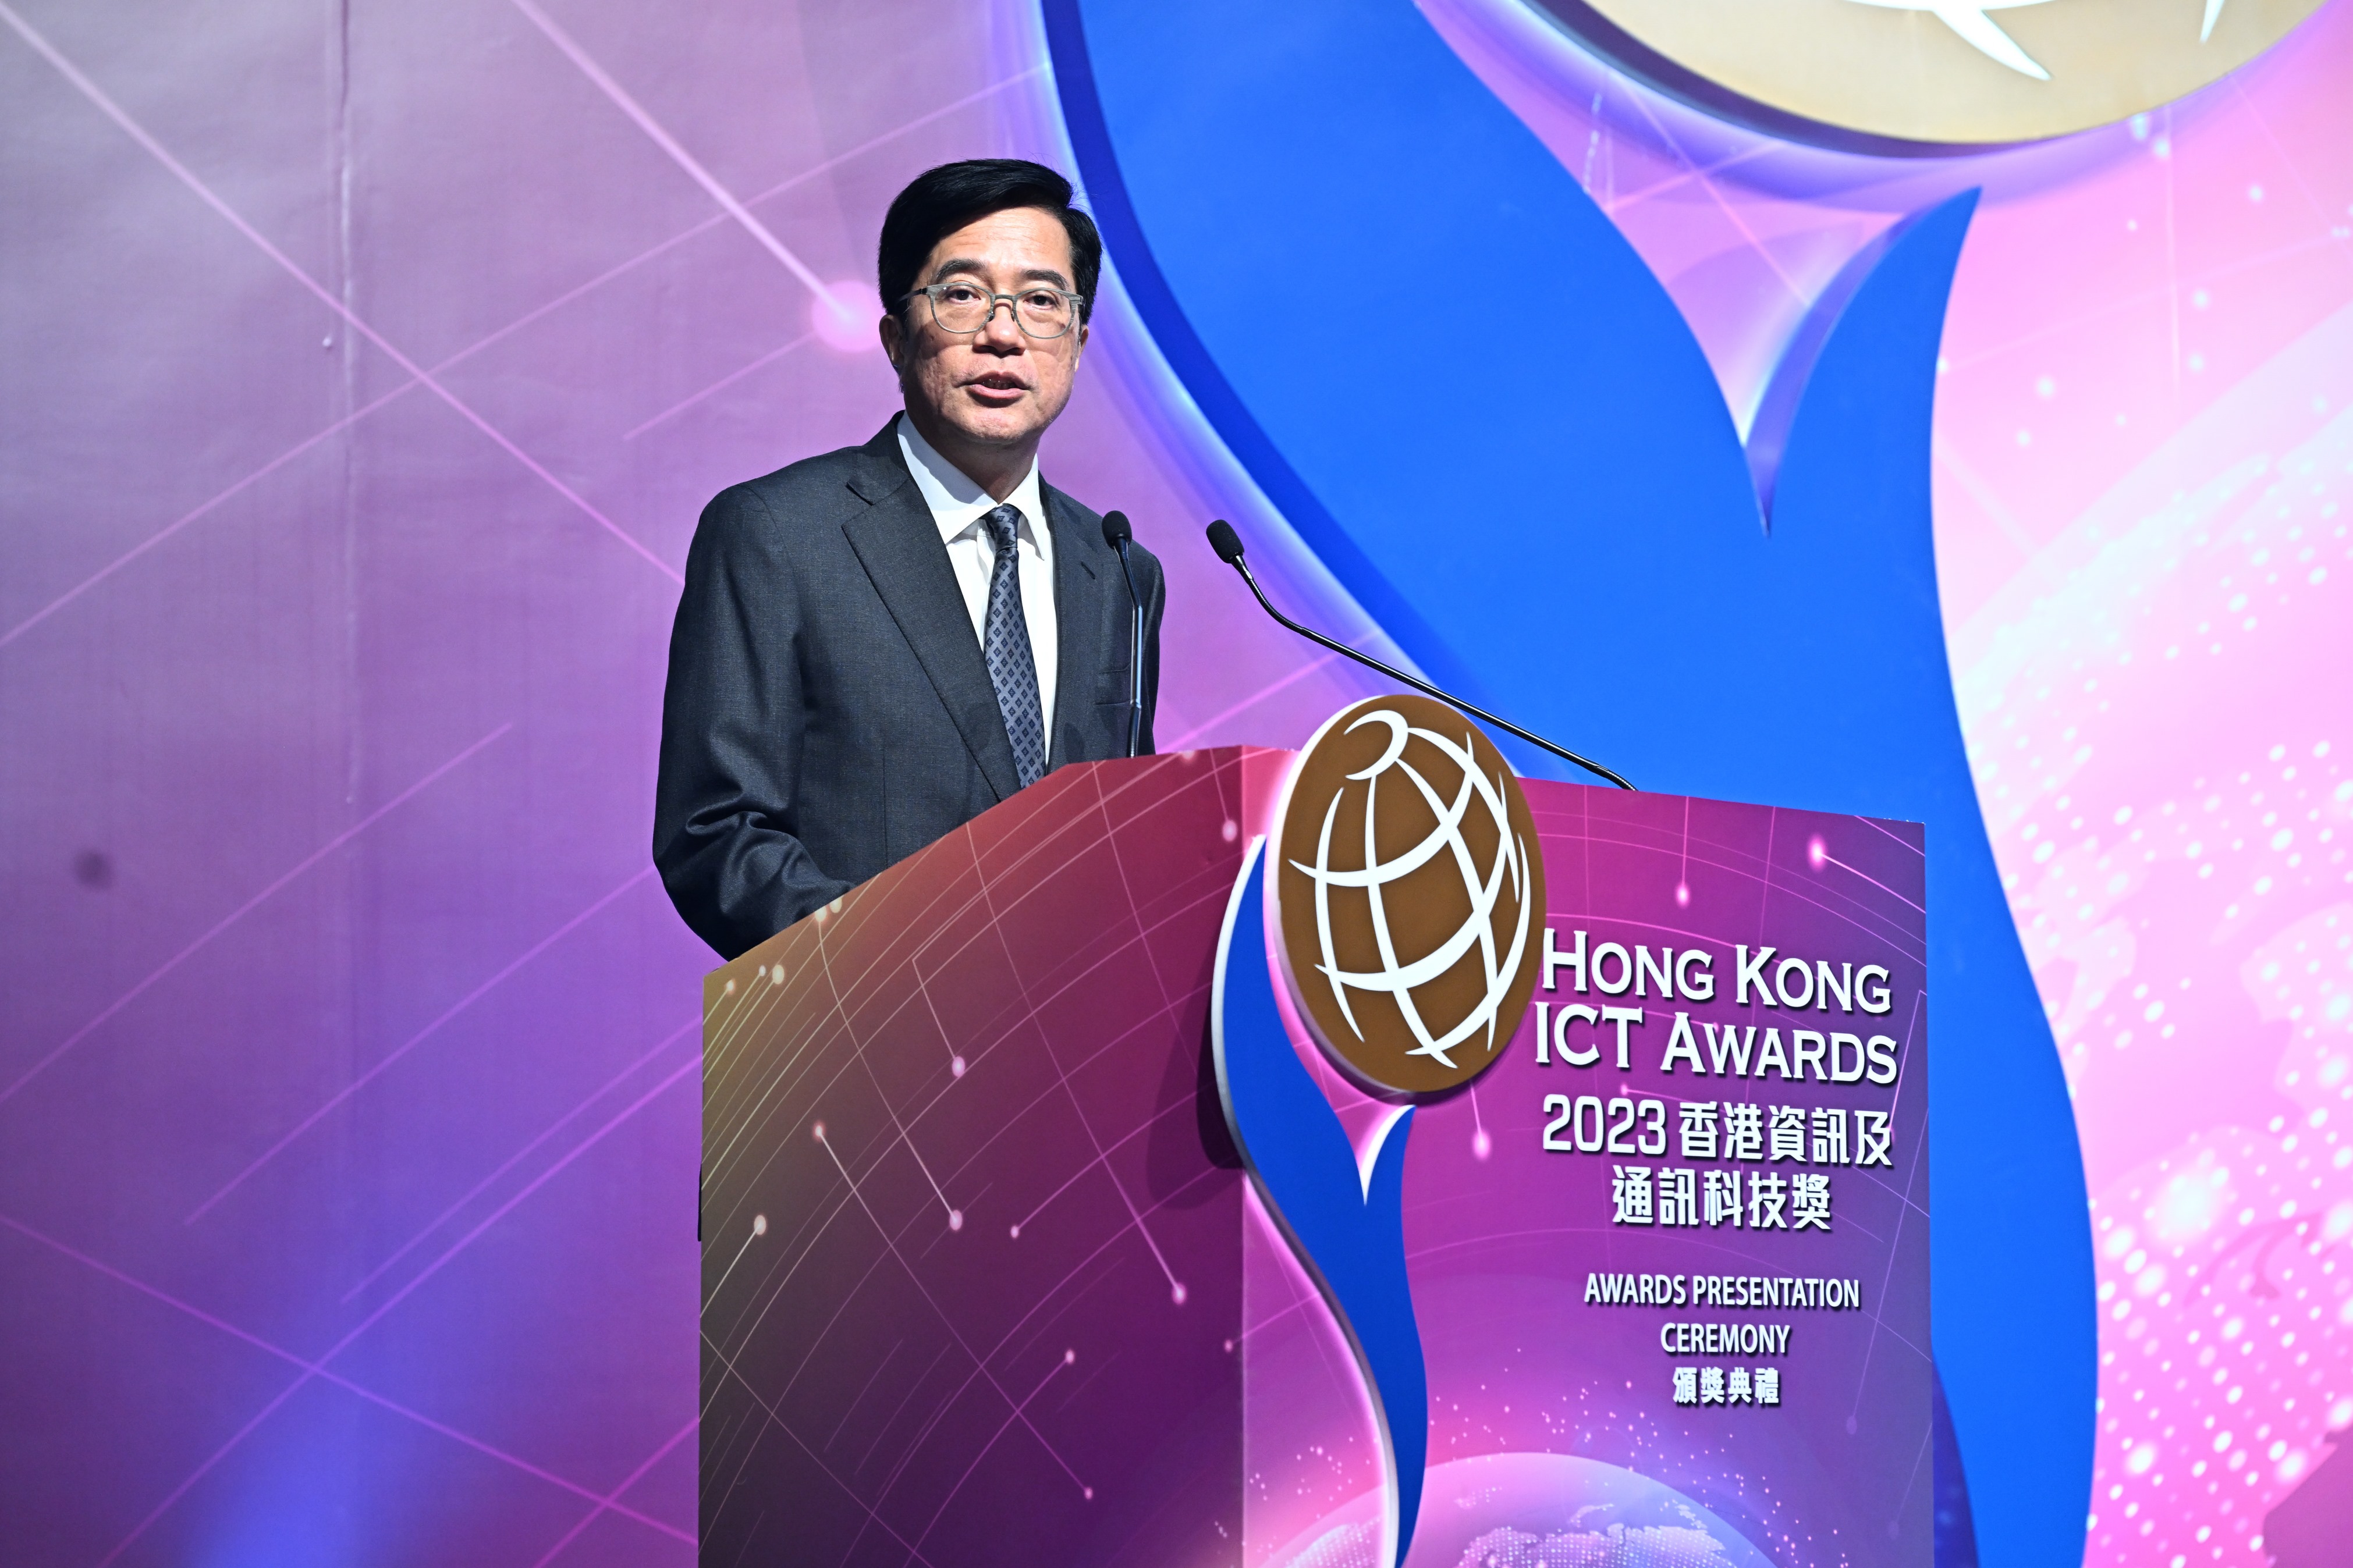 Hong Kong ICT Awards 2023 Awards Presentation Ceremony, Opening Remarks by Guest of Honour